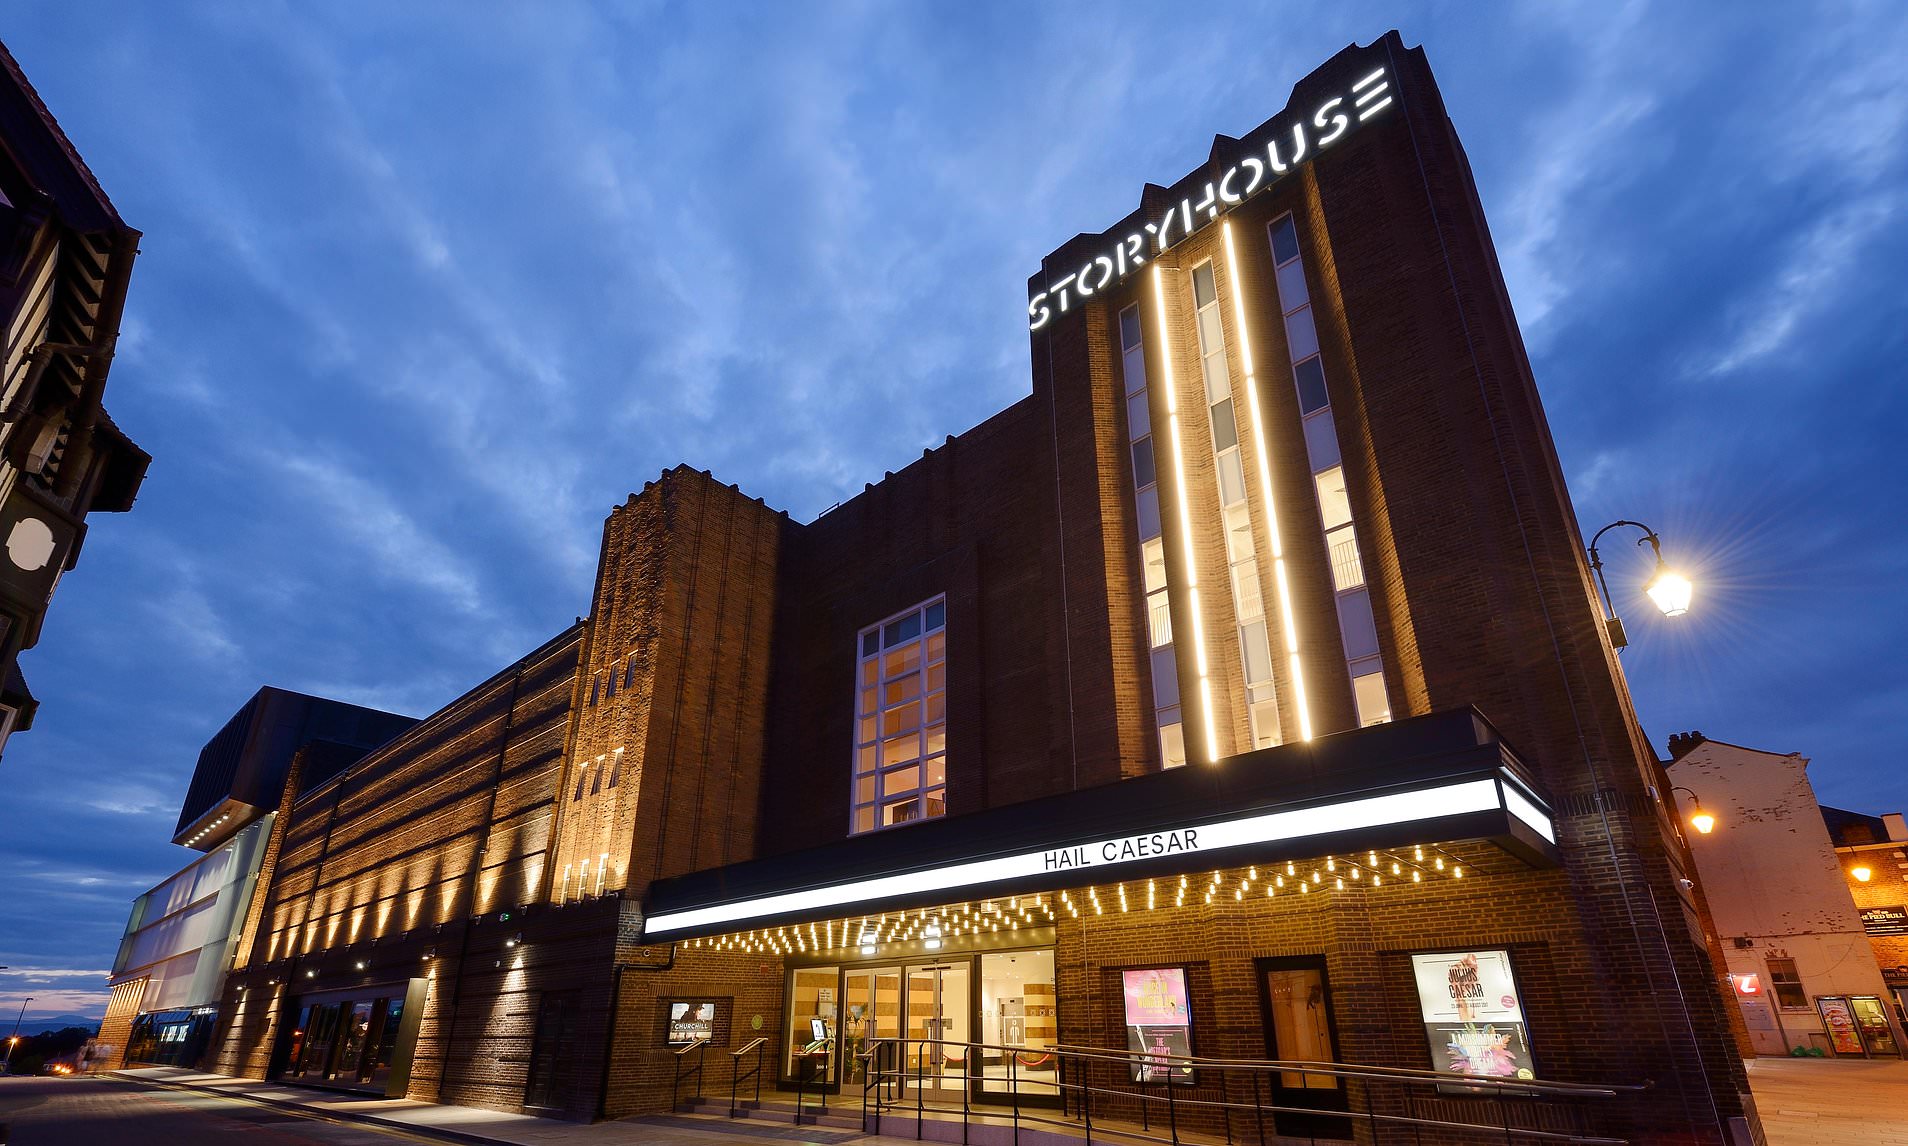 Storyhouse Cultural Centre, Chester